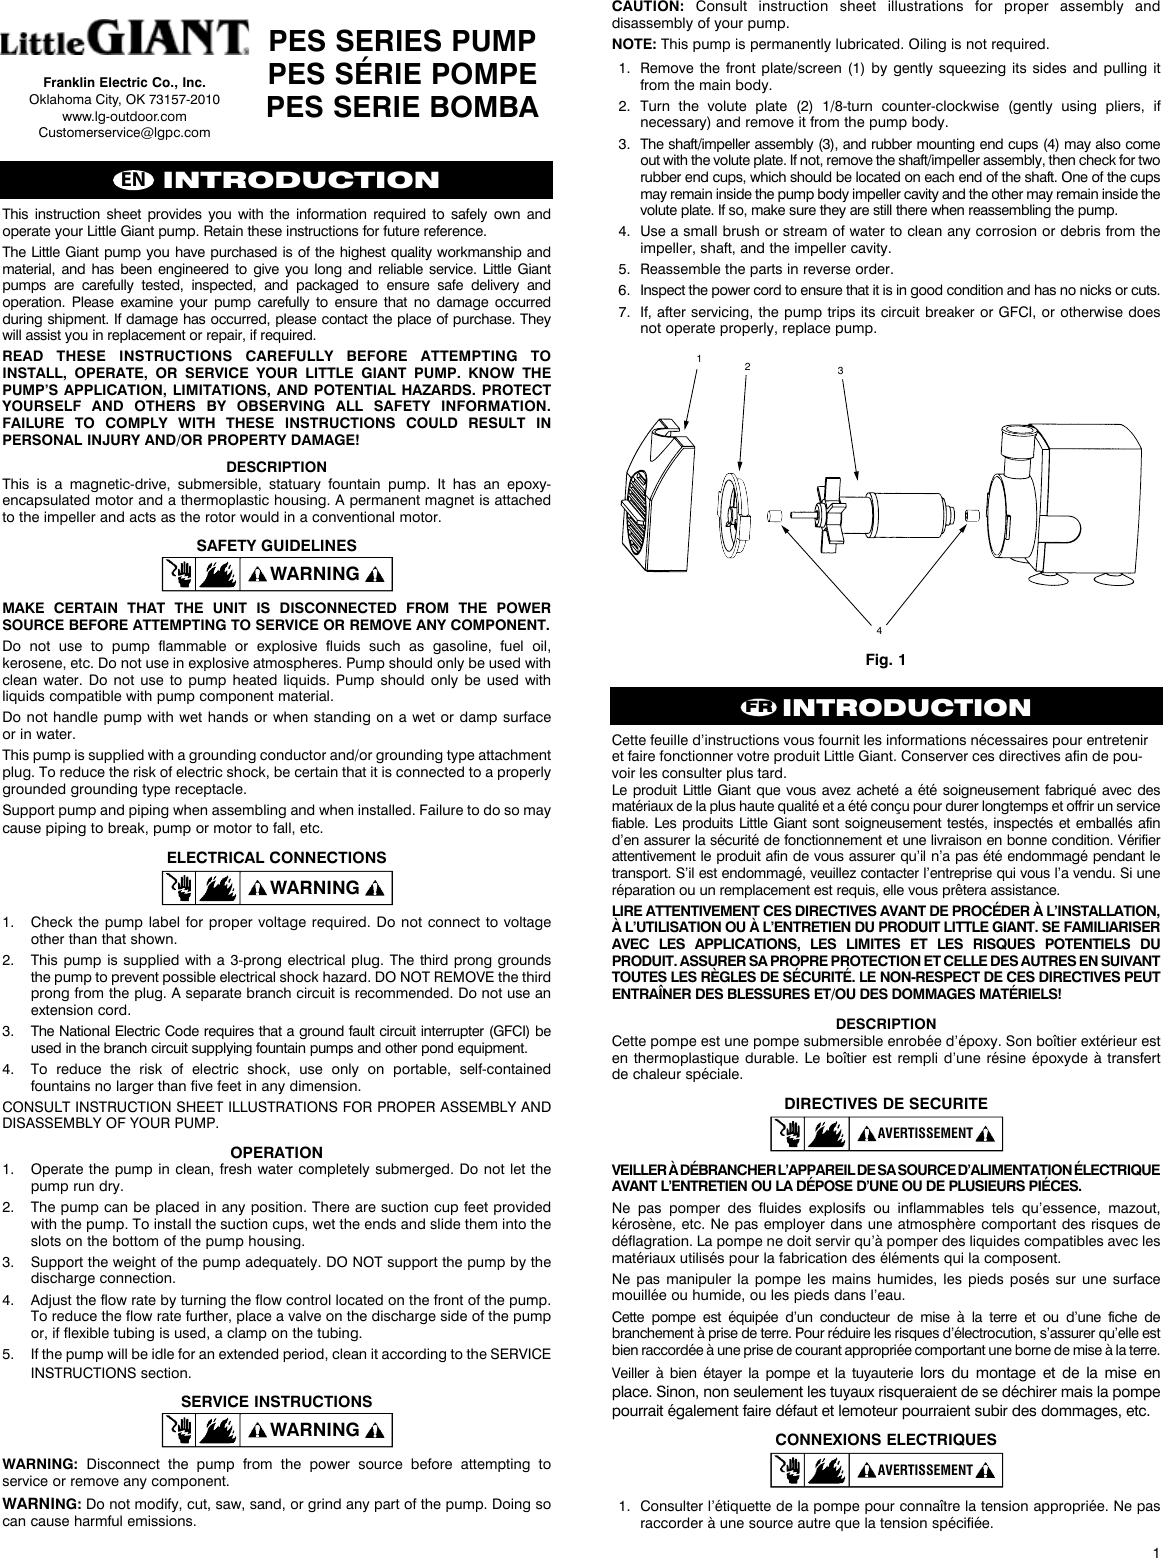 Page 1 of 4 - 412001 2 Little Giant Pes Series Pump Instructions User Manual